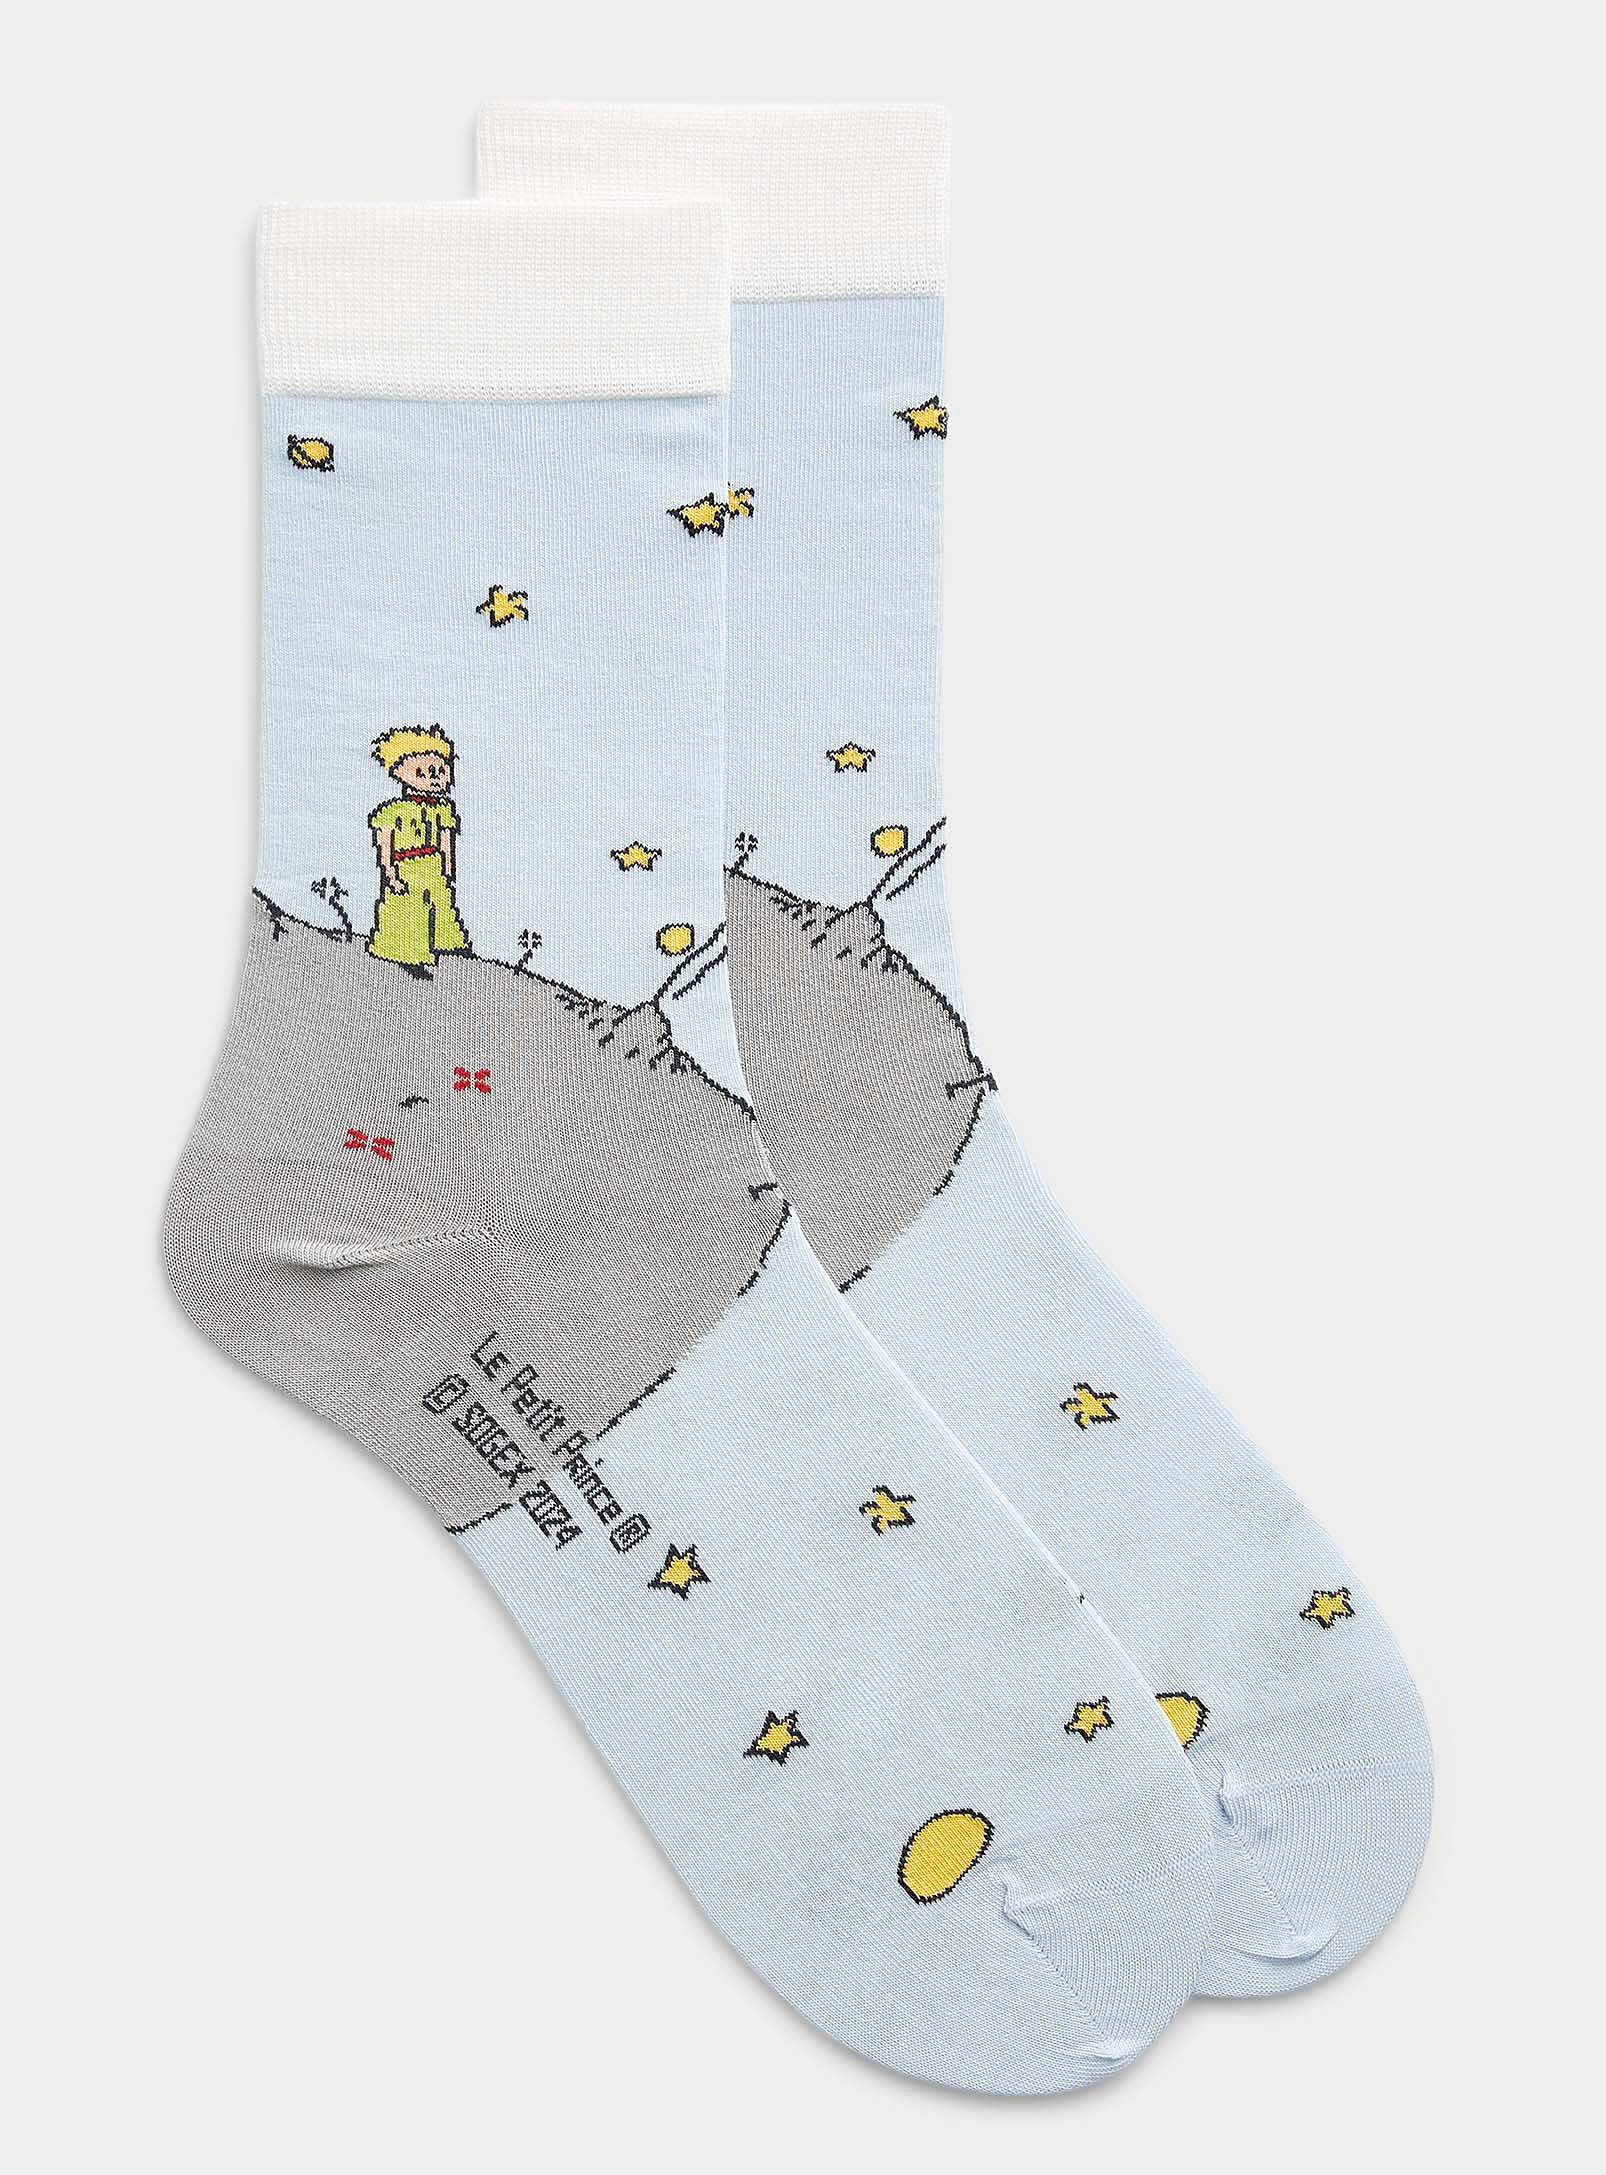 Sock Affairs Le Petit Prince Asteroid Sock In Blue